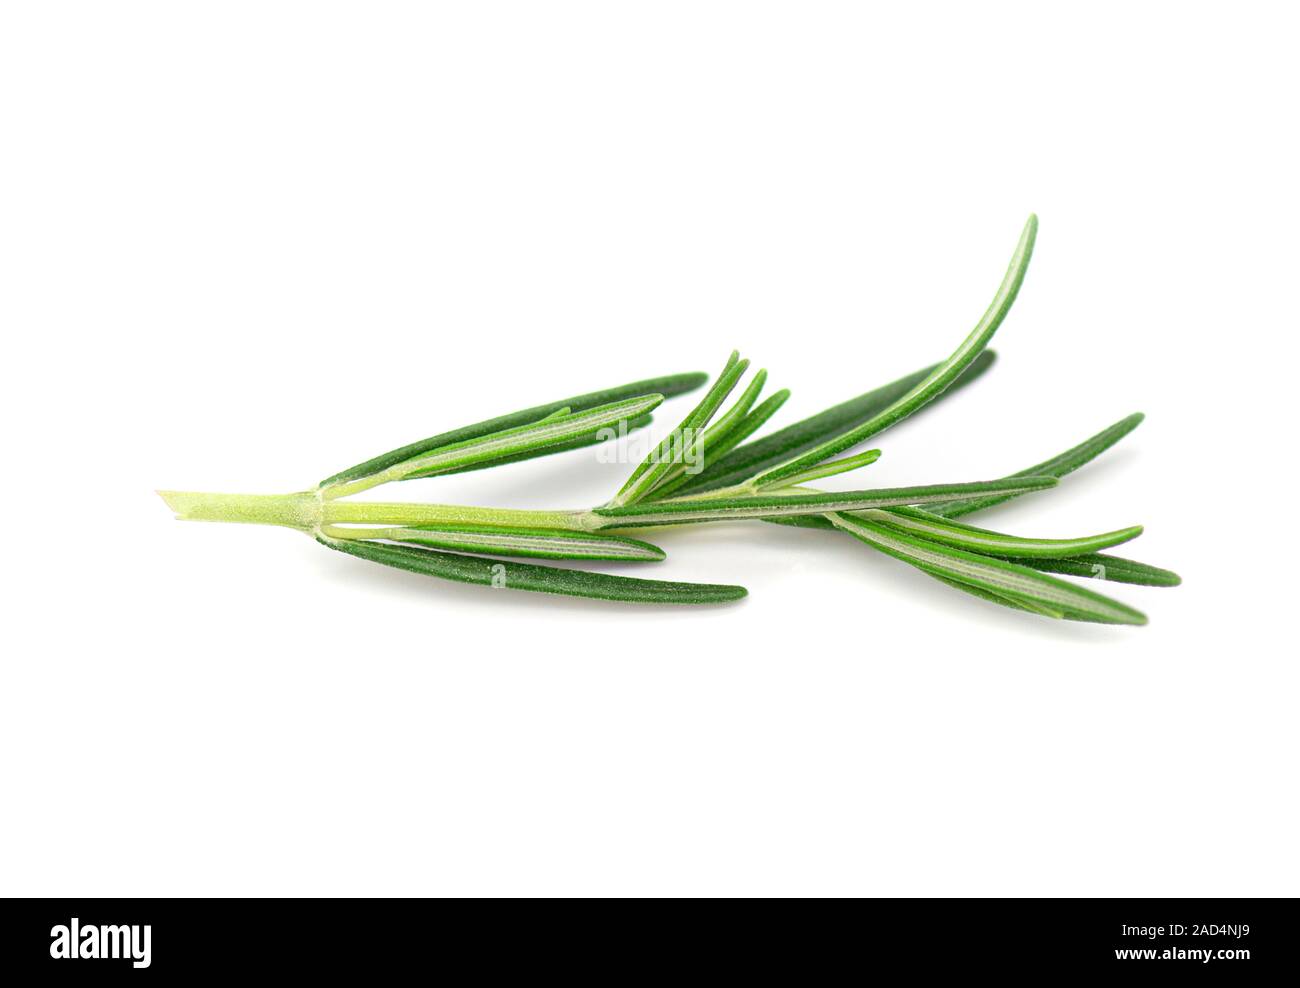 Rosemary, Rosemary Twig and Leaves isolated on white Background Stock Photo